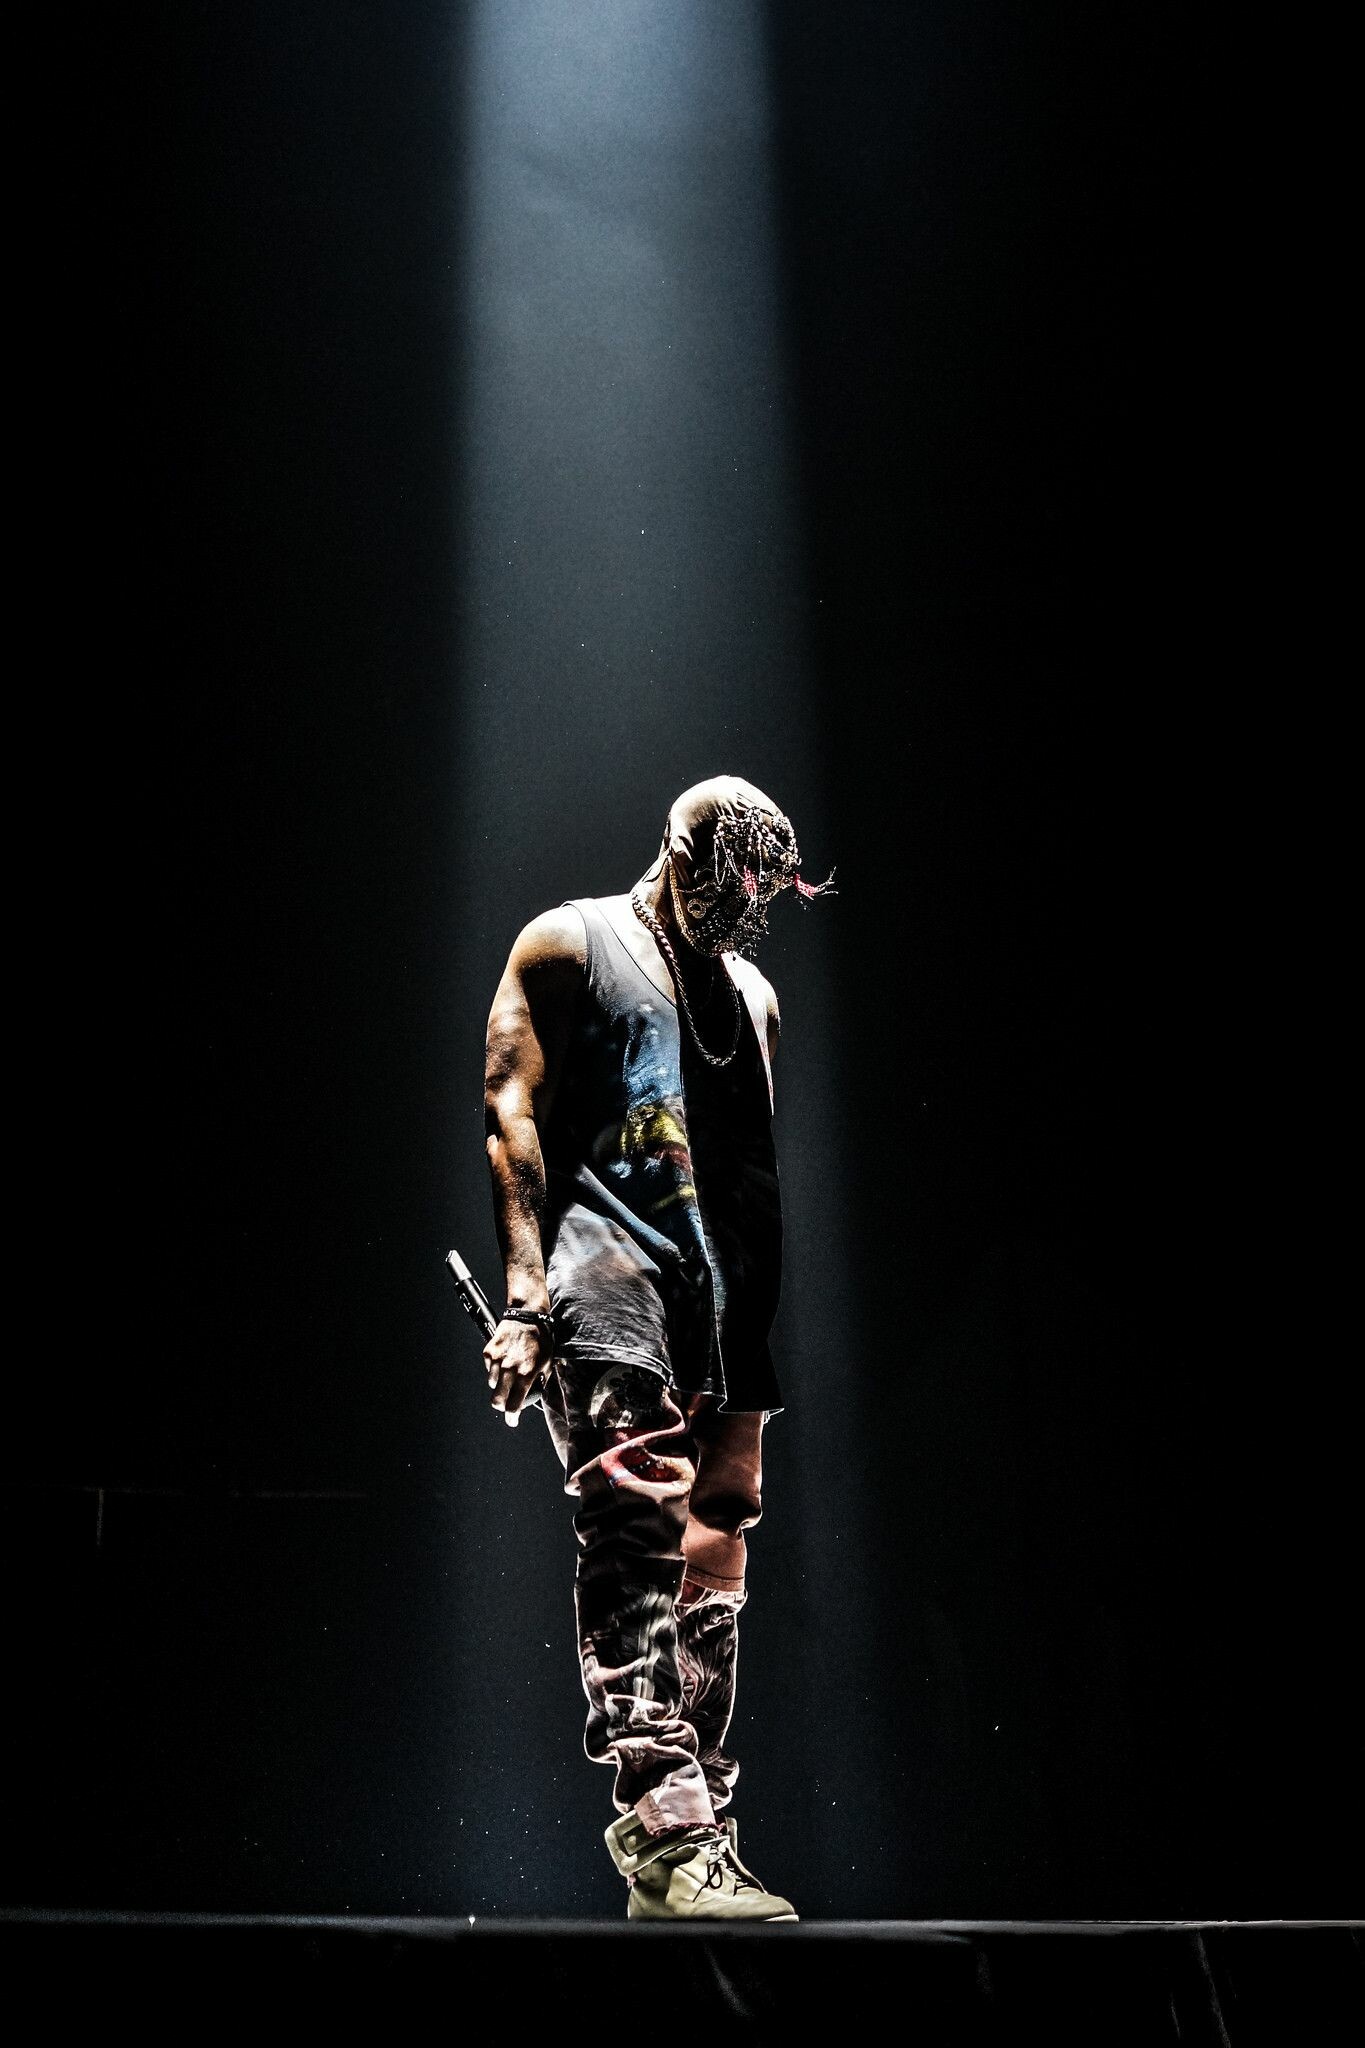 Kanye West: Ye, One of the most influential and critically lauded artists of the early 21st century. 1370x2050 HD Background.